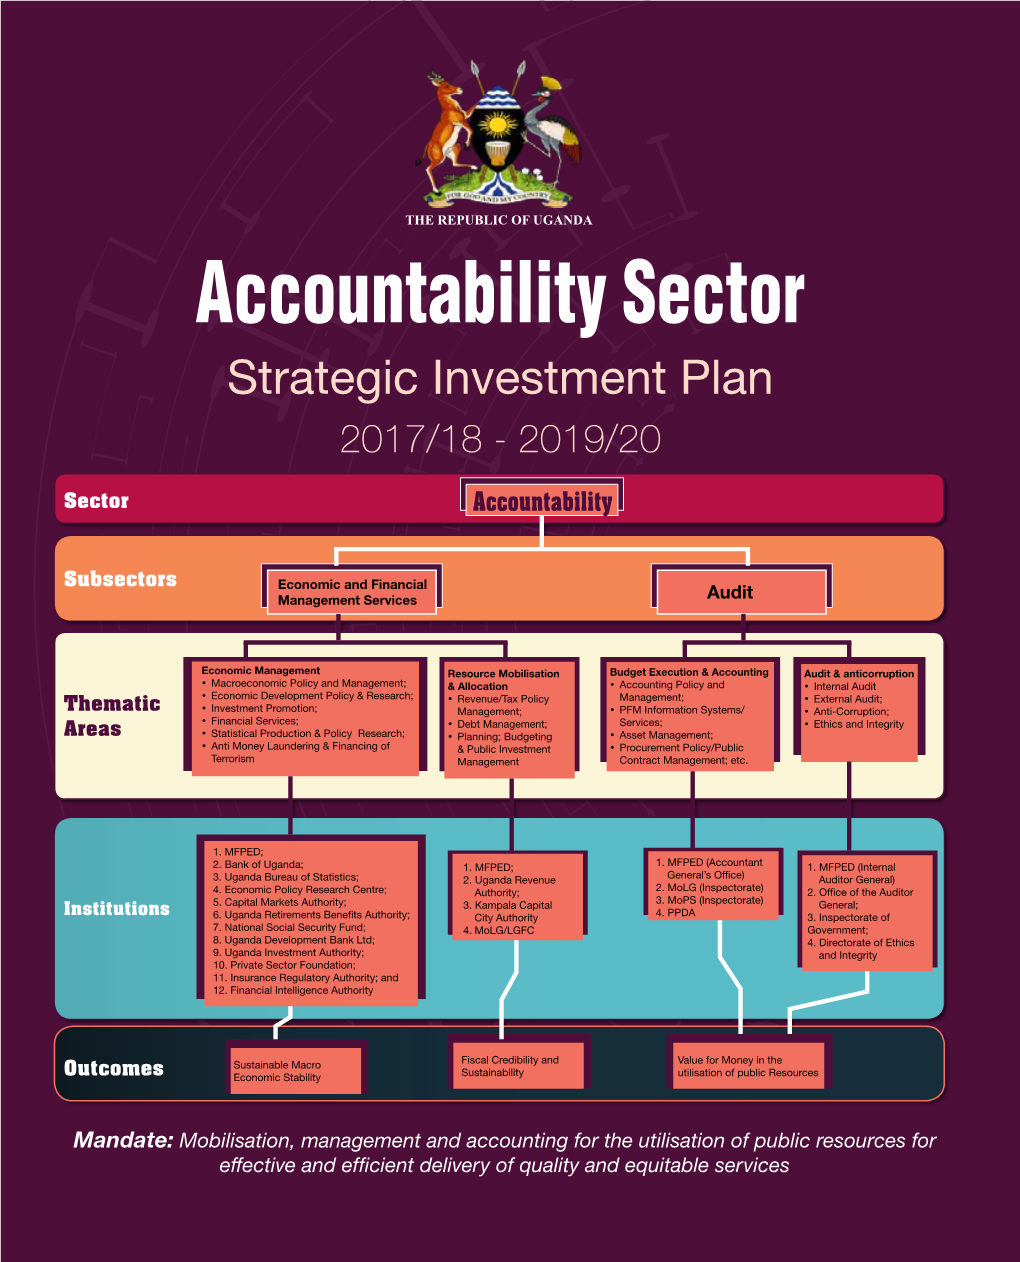 Accountability Sector Strategic Investment Plan 2017/18 - 2019/20